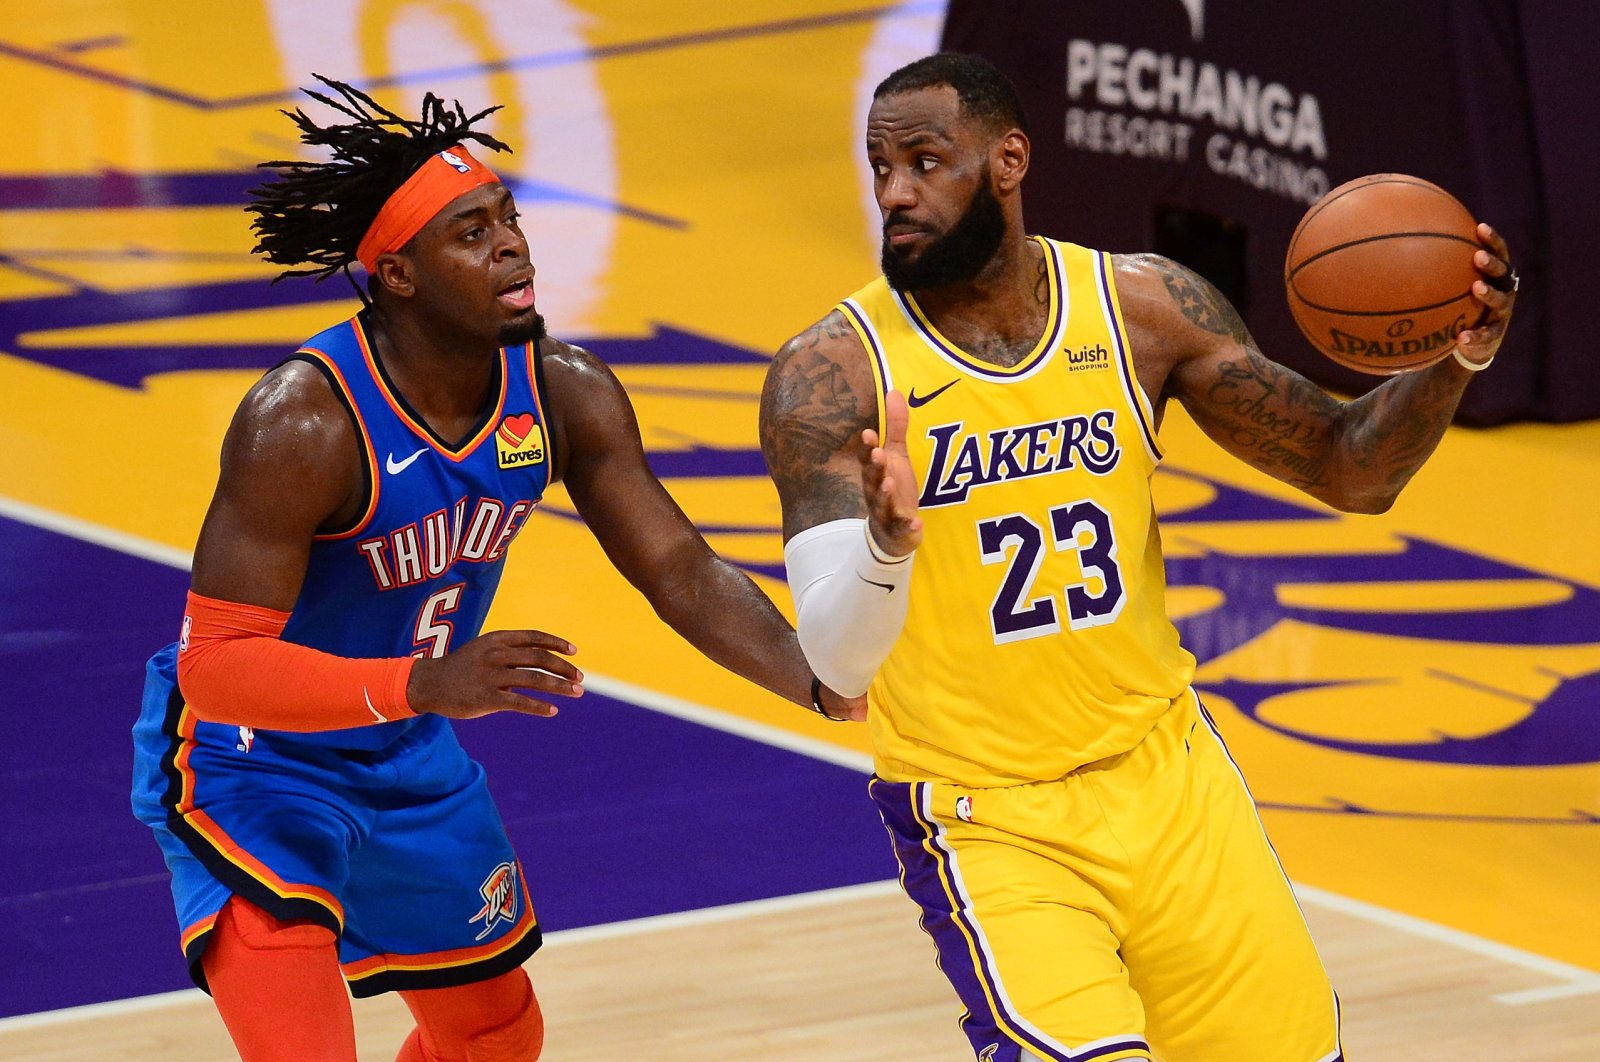 Los Angeles Lakers forward LeBron James (R) controls the ball against Oklahoma City Thunder forward Luguentz Dort during the overtime period at Staples Center, Los Angeles, California, U.S., Feb. 10, 2021. (Reuters Photo)